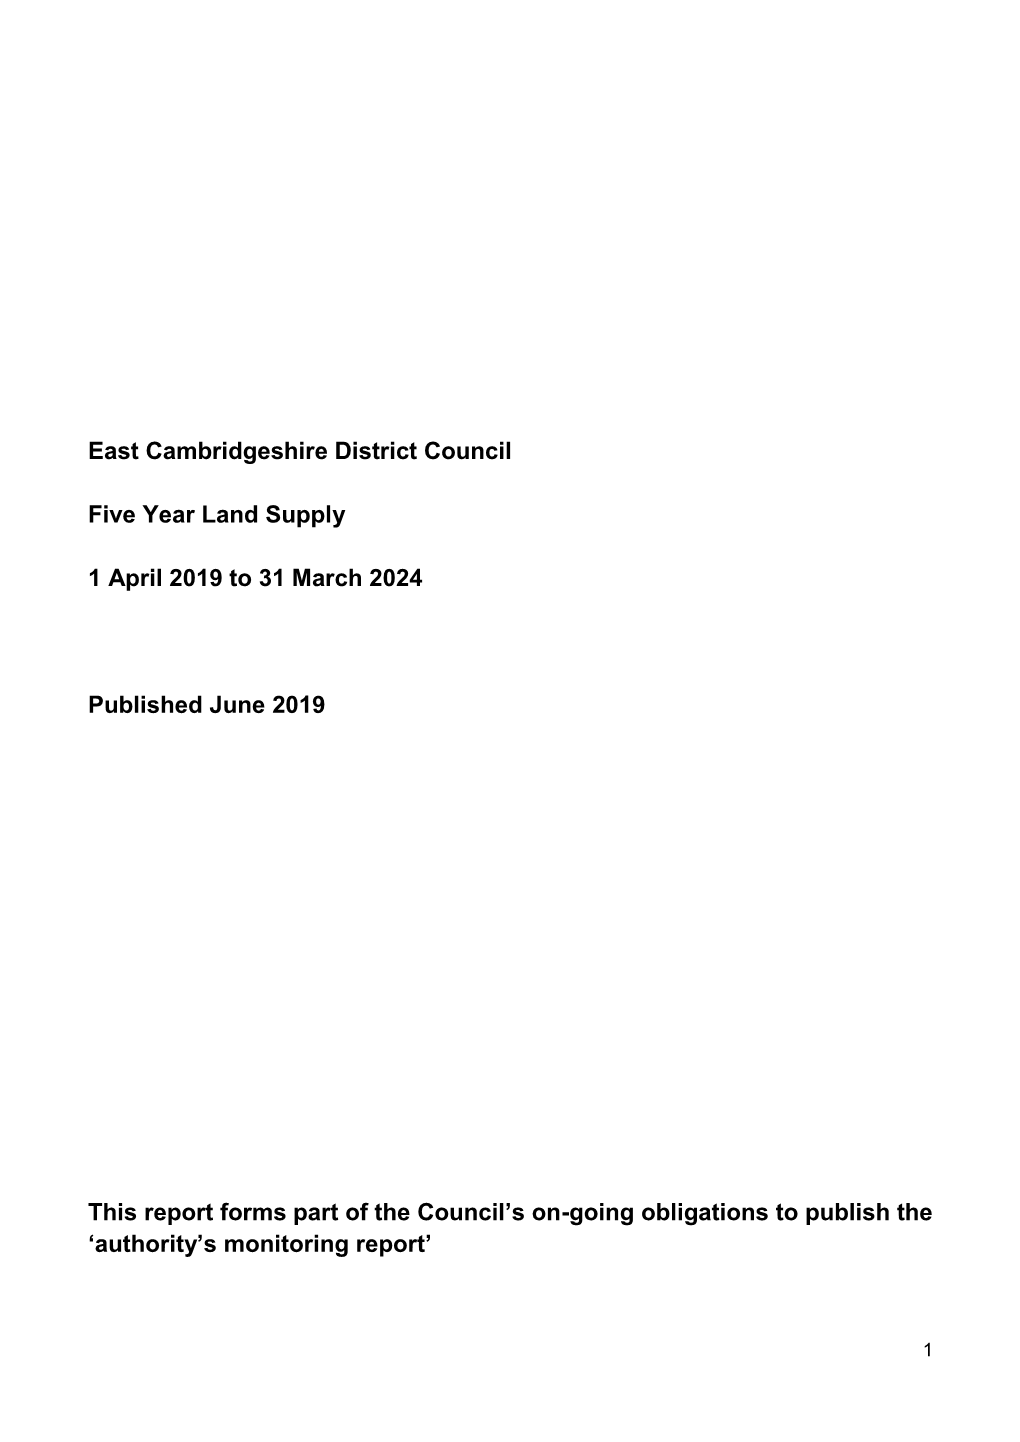 East Cambridgeshire District Council Five Year Land Supply 1 April 2019